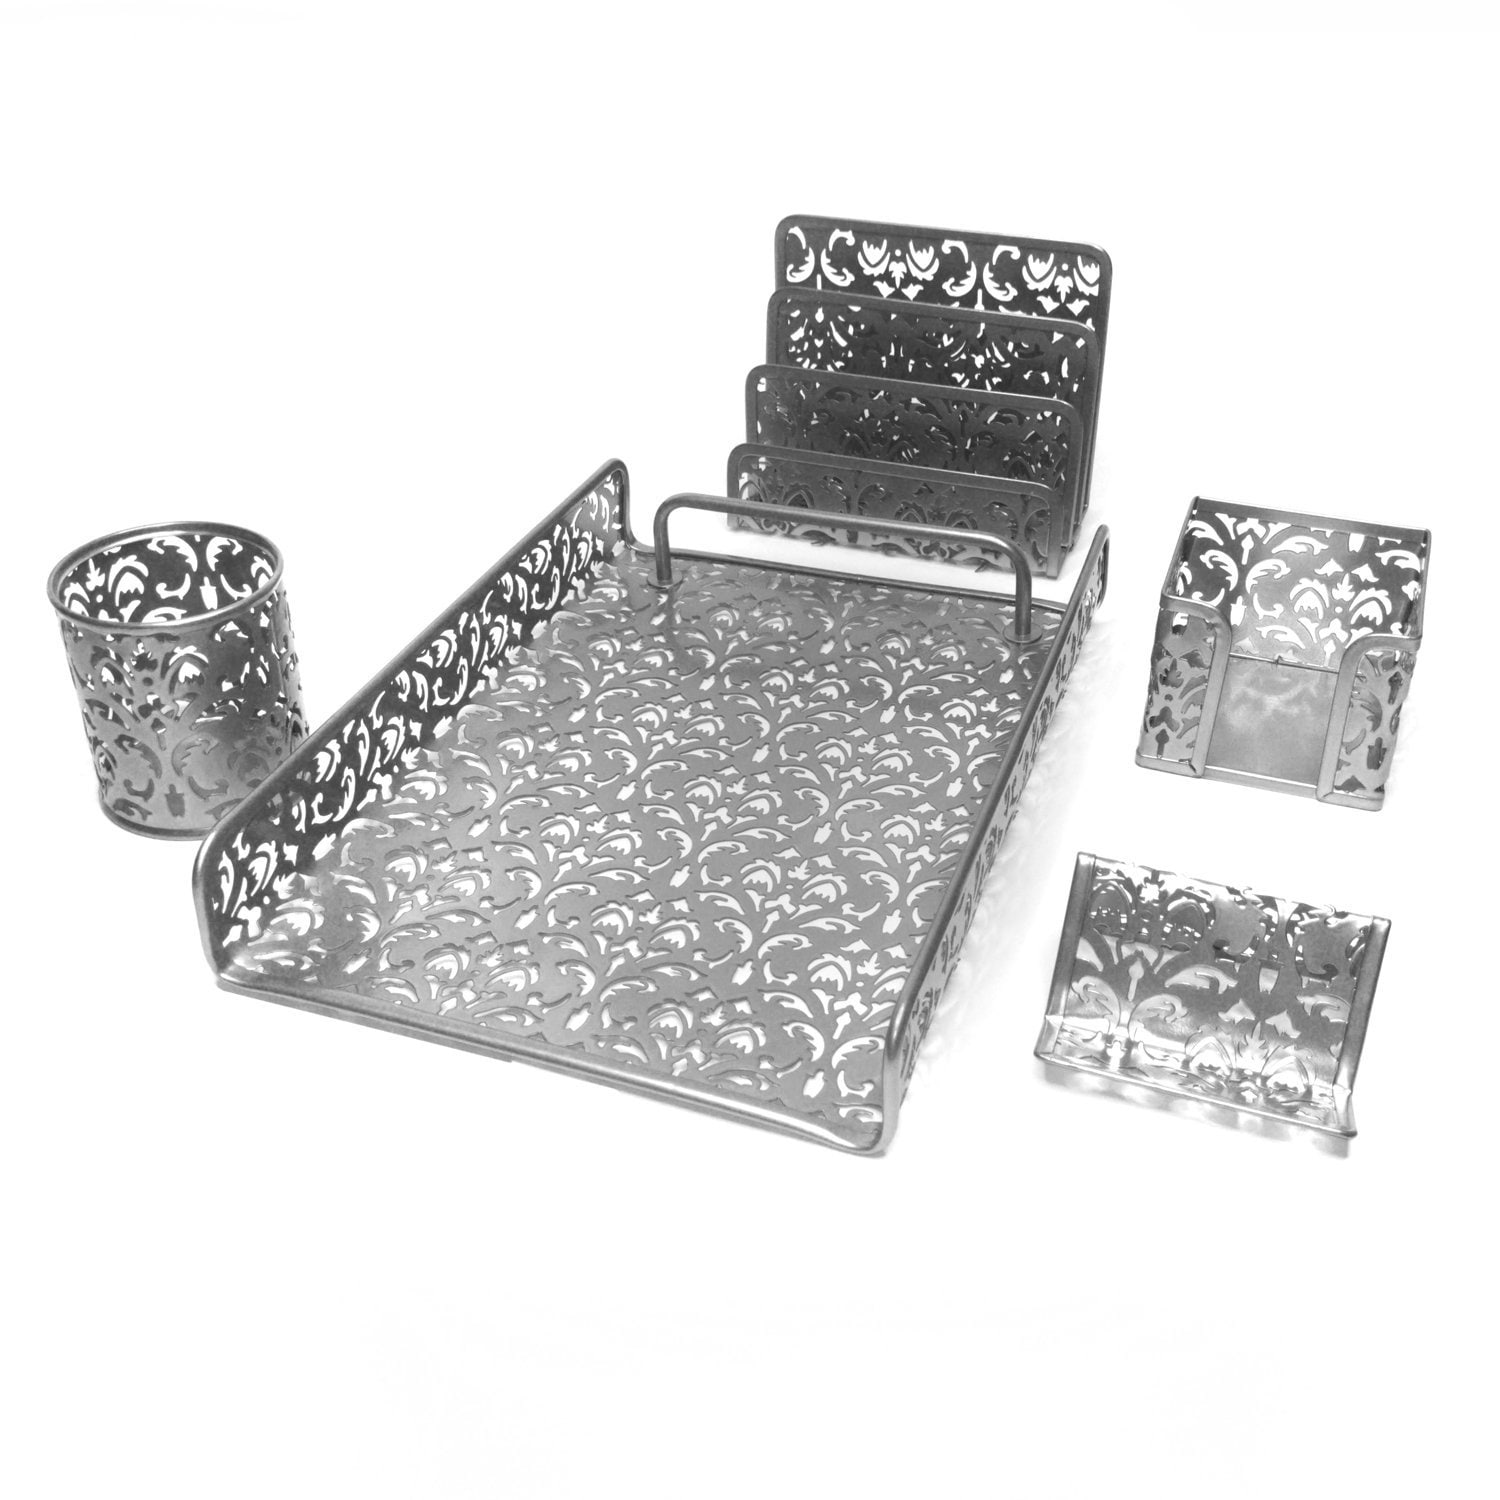 Shop Majestic Goods 5 Piece Silver Flower Design Punched Metal